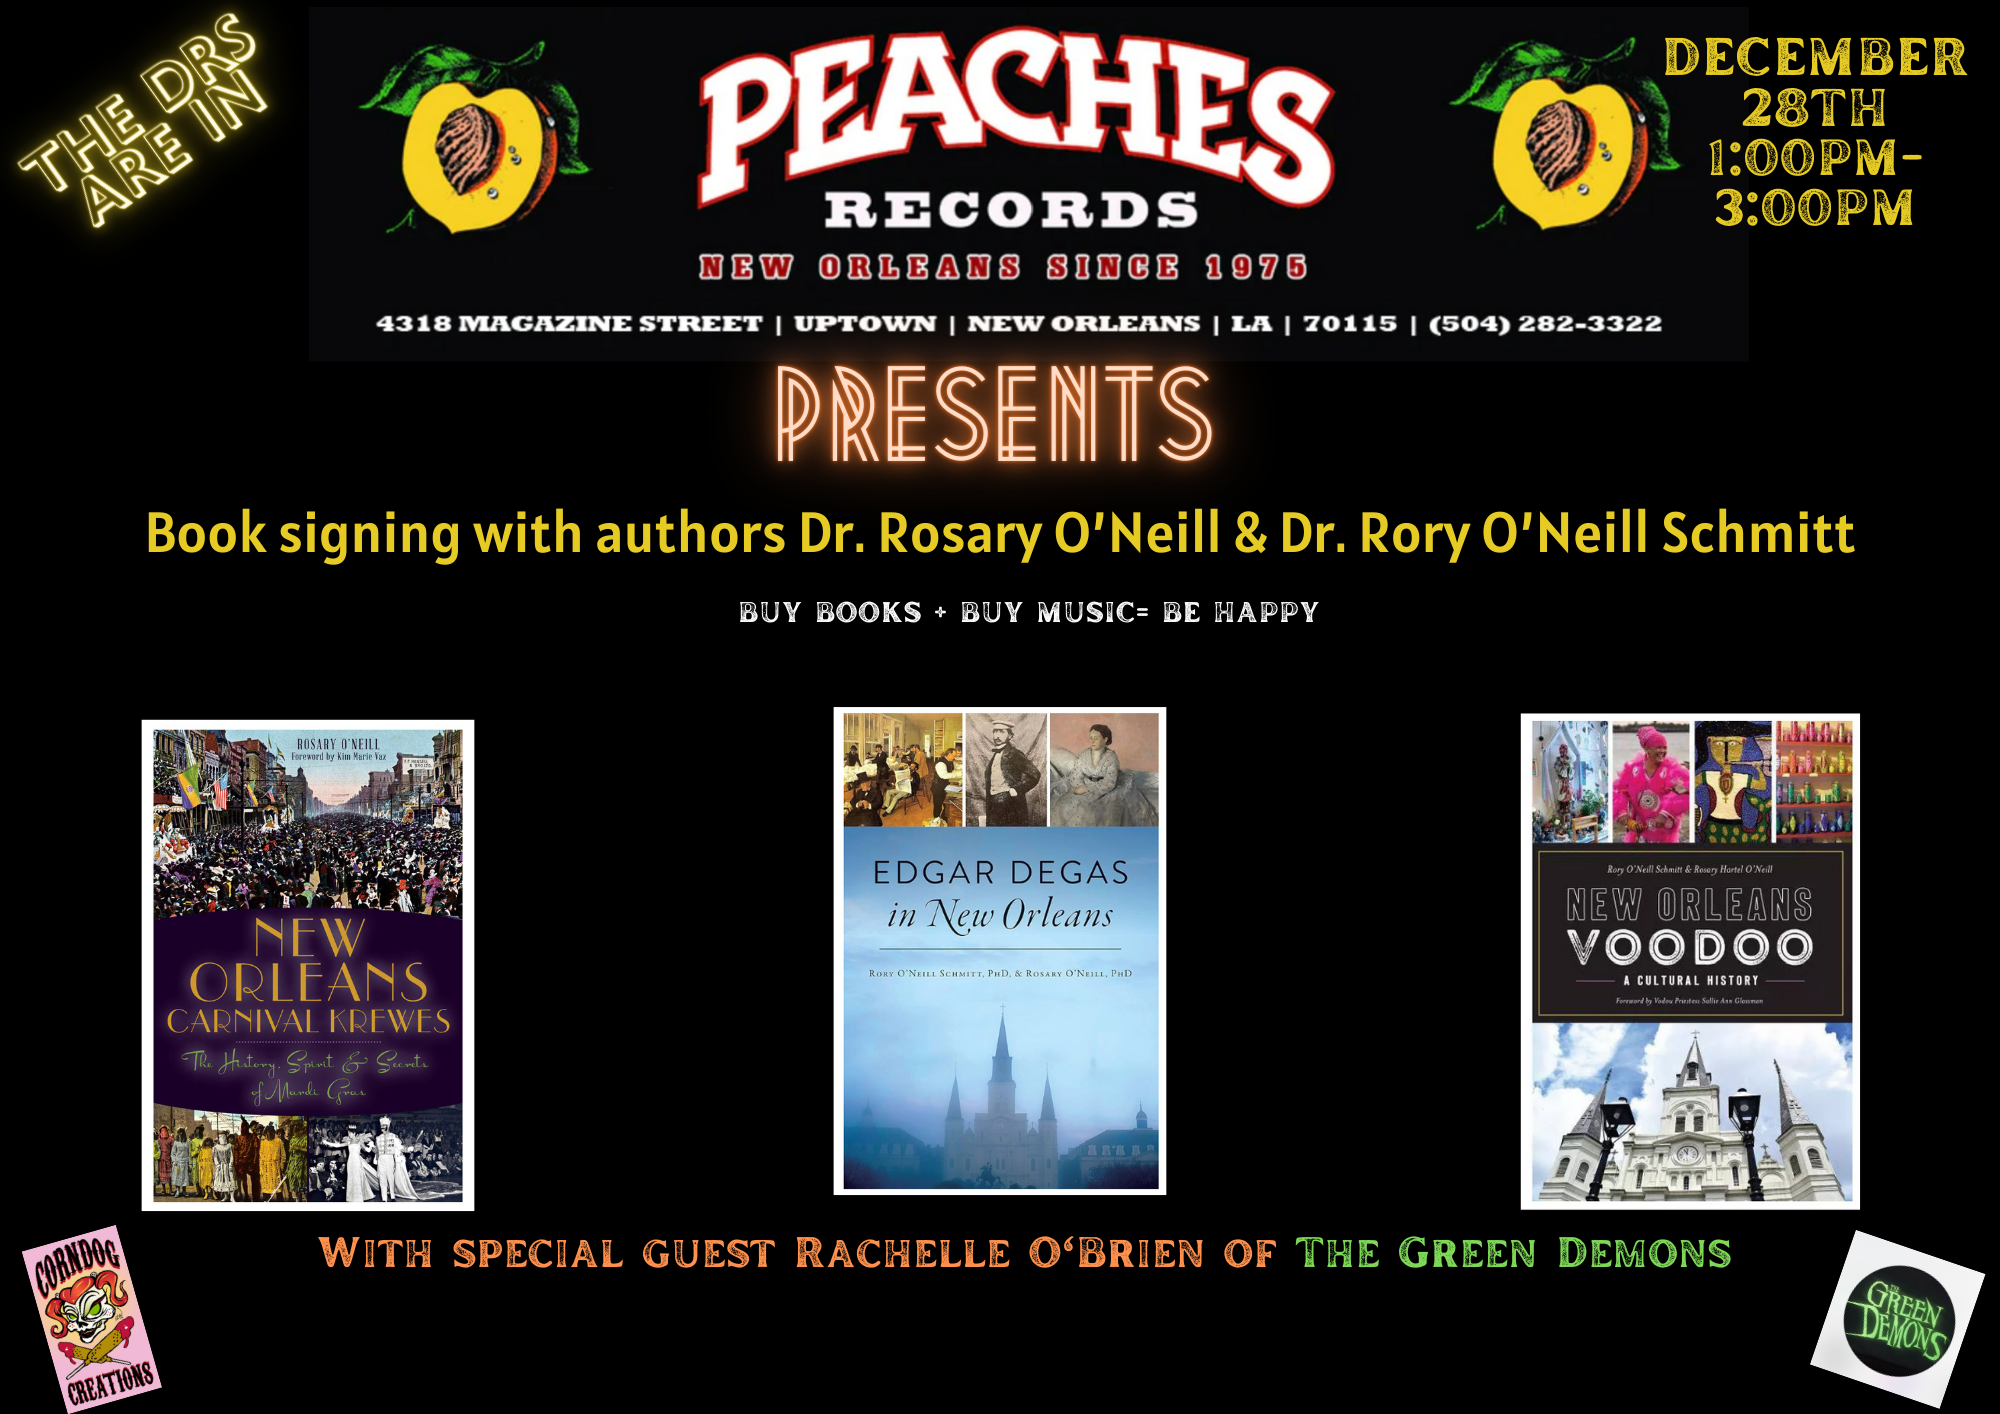 Book signing with authors Dr. Rosary O'Neill & Dr. Rory O'Neill Schmitt